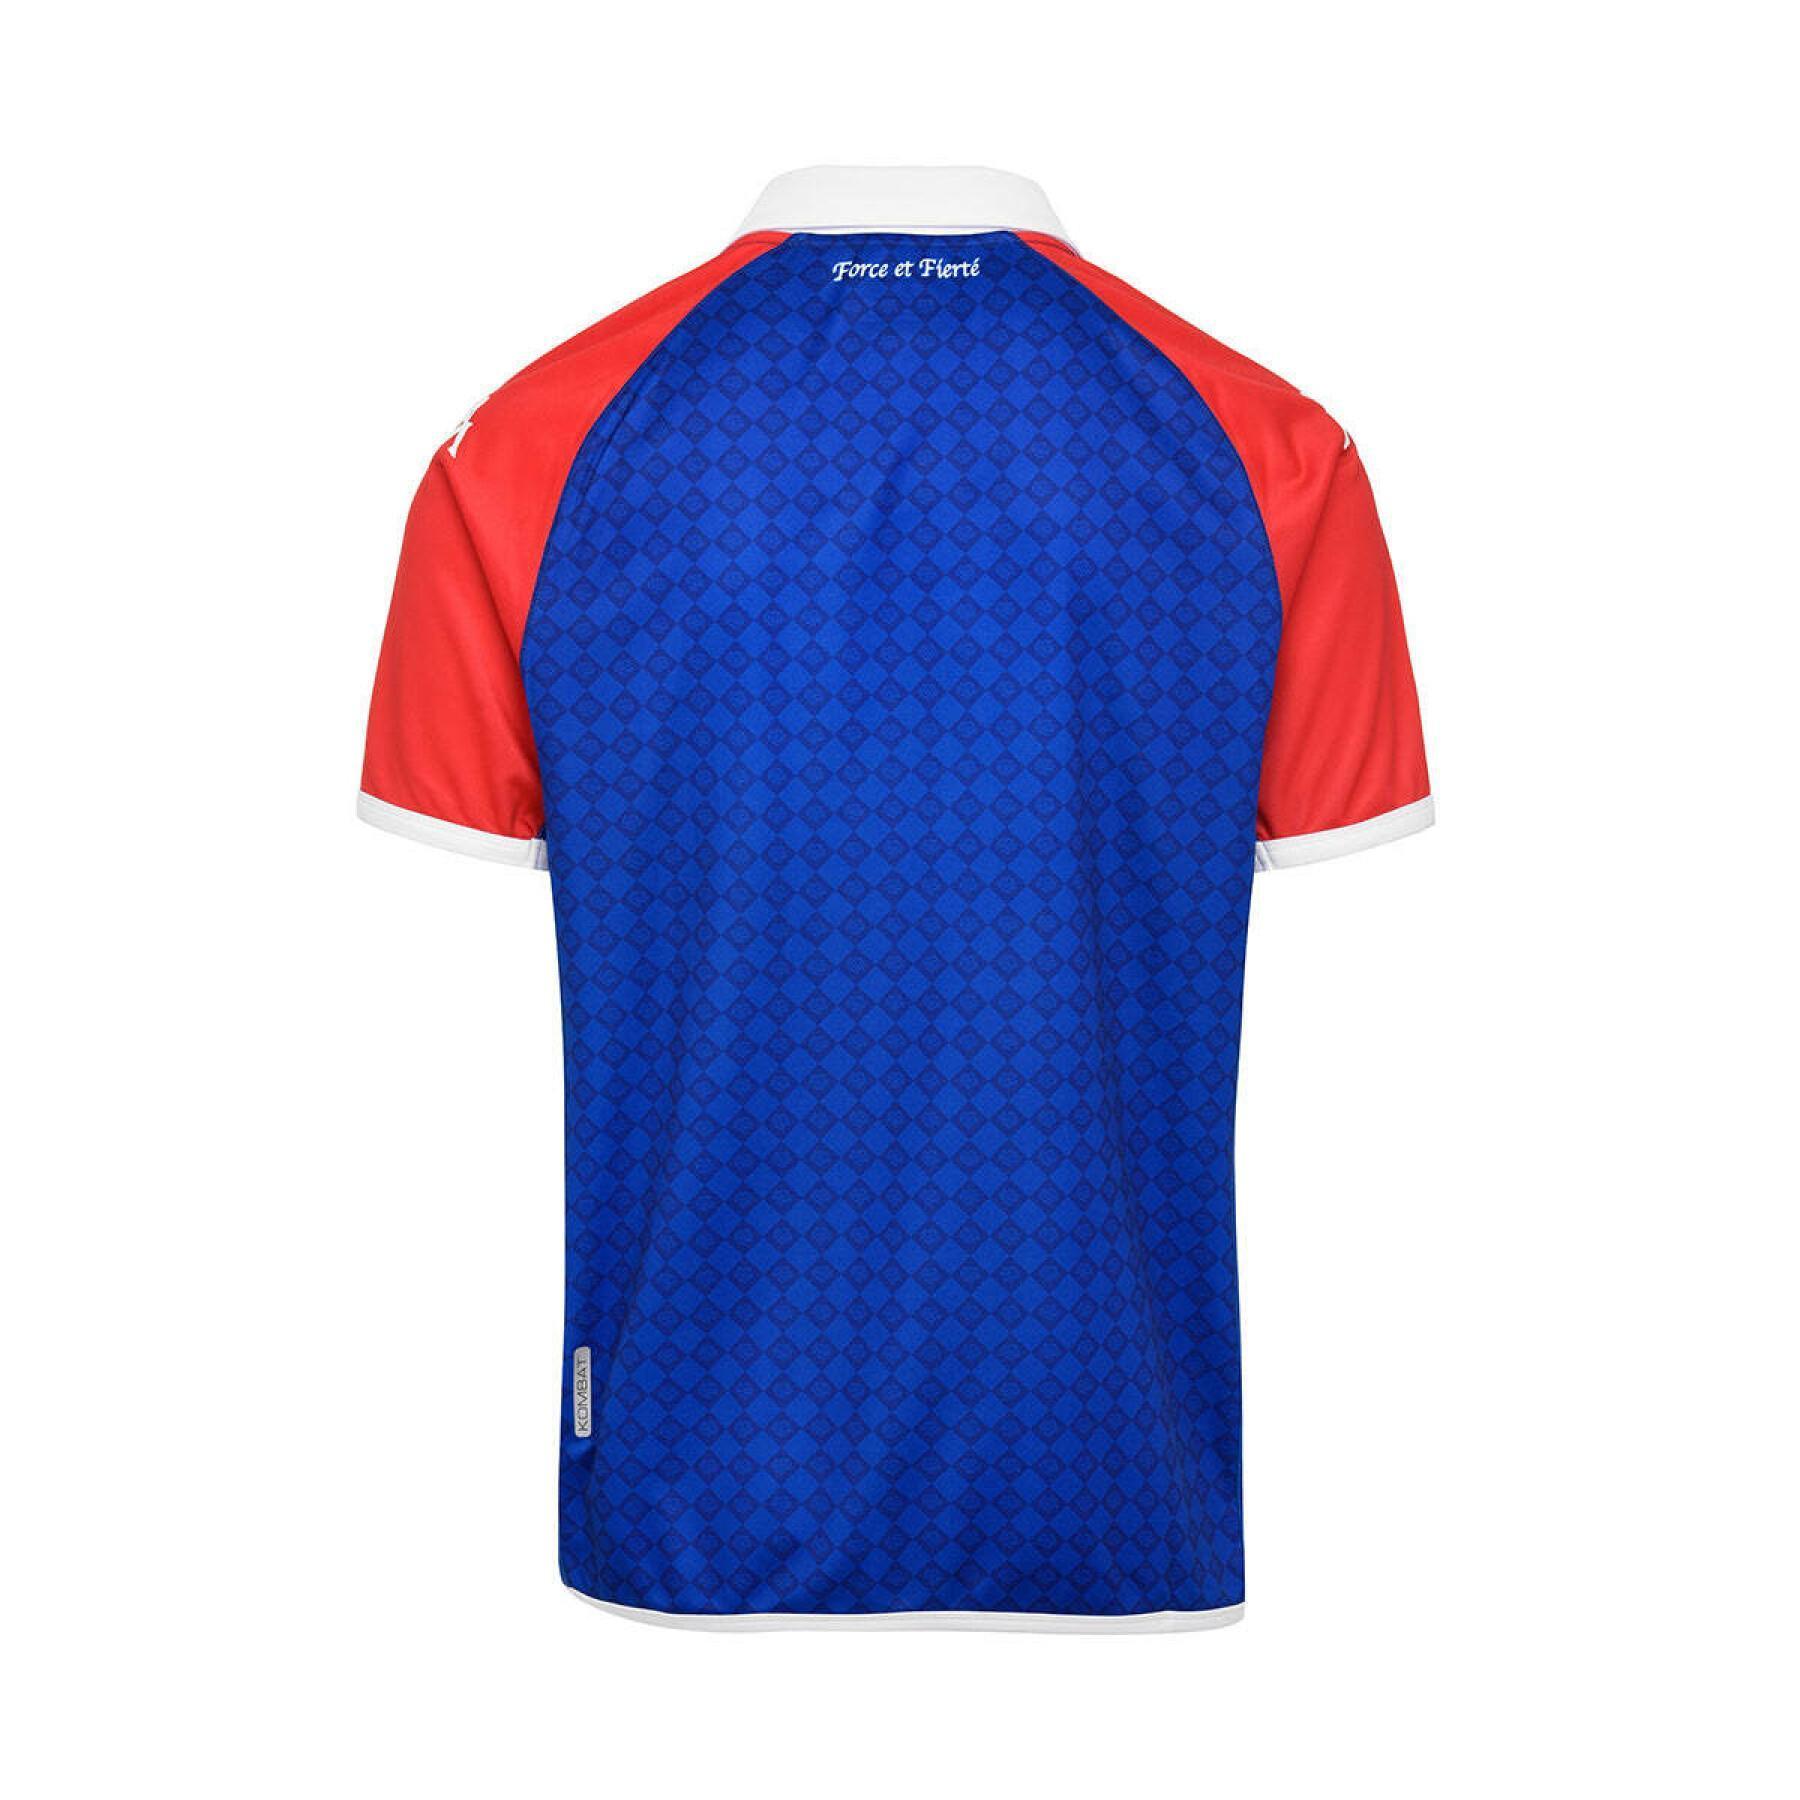 Children's home jersey FC Grenoble Rugby 2022/23